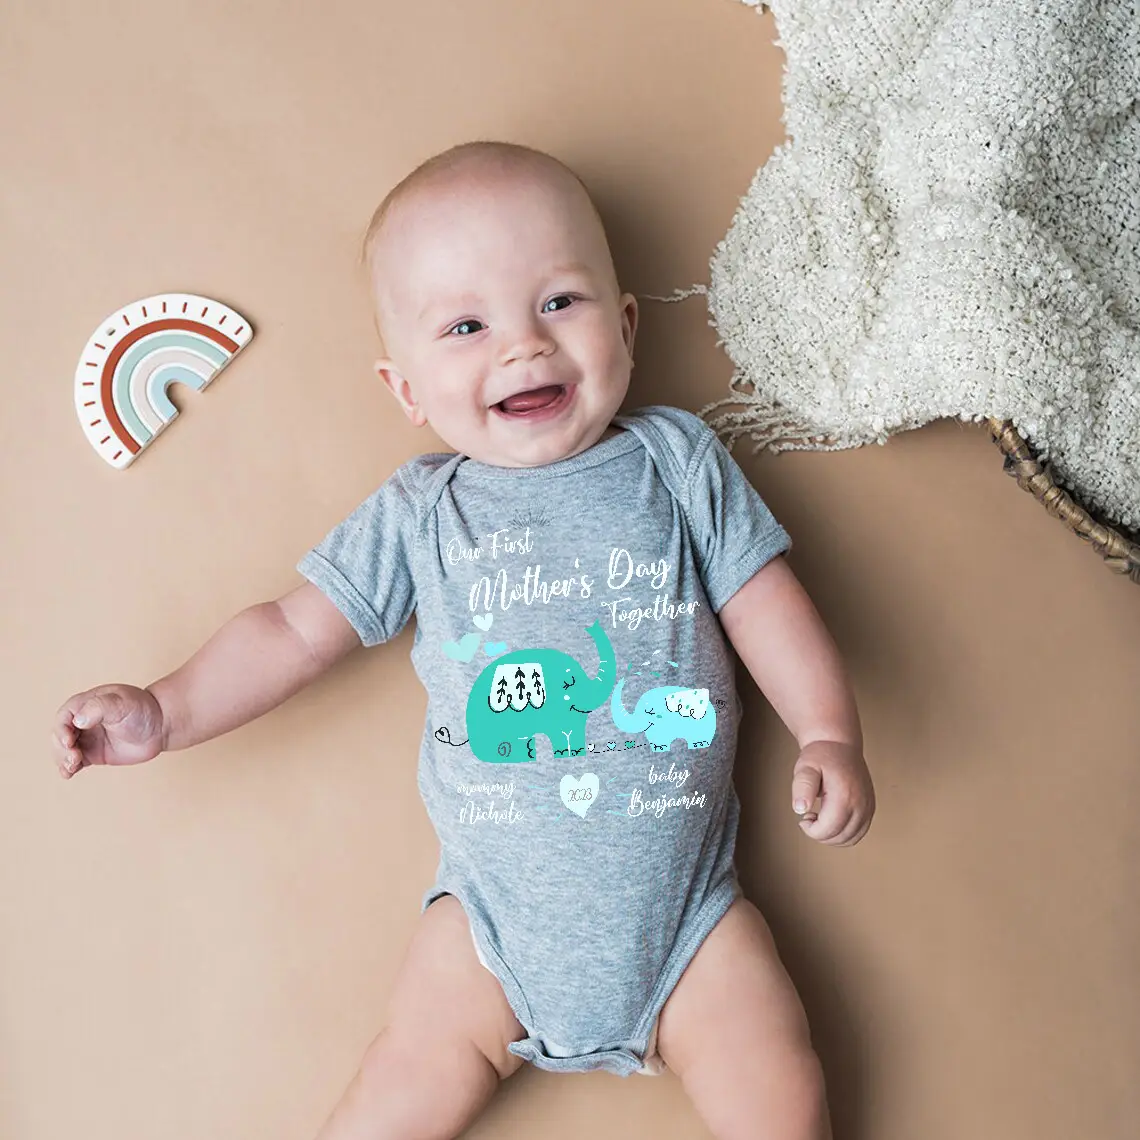 first mother's day matching outfits | our first mothers day matching shirts | first mothers day outfit | first mothers day matching shirts | first mothers day onesies